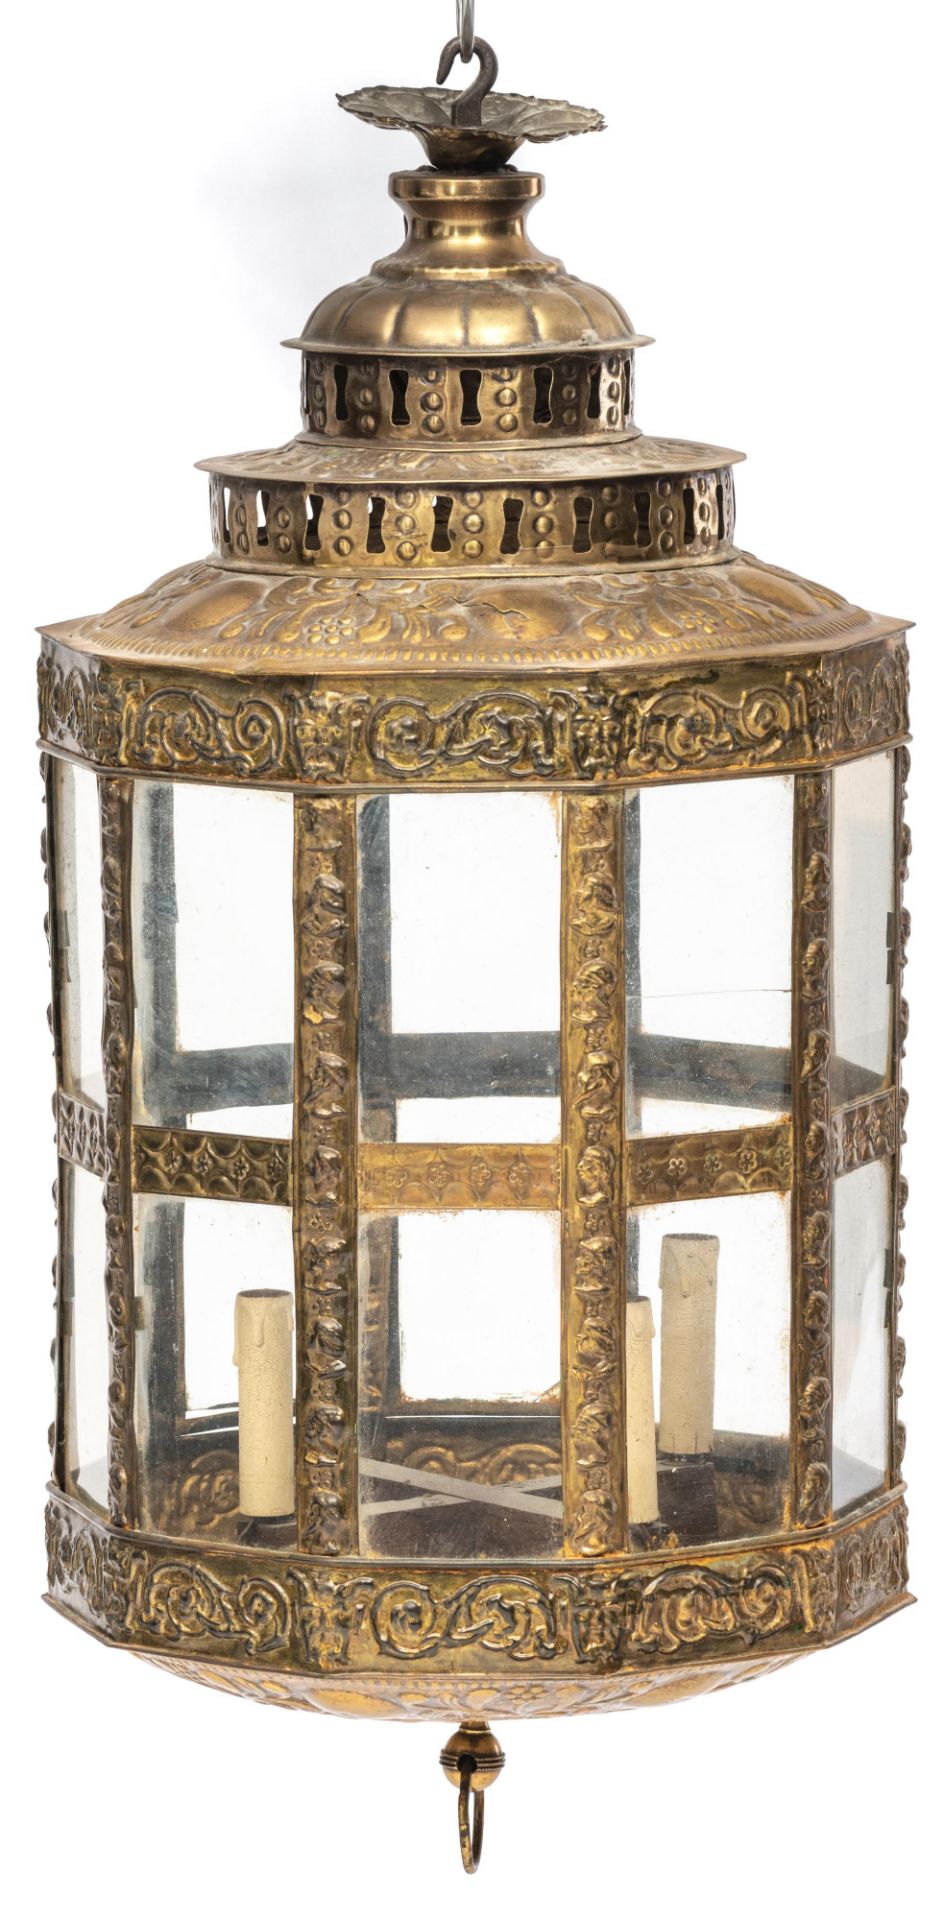 A Low-Countries brass lantern in a 17thC manner (possibly of the period or 19thC), H all-in 88 cm, , - Image 2 of 9